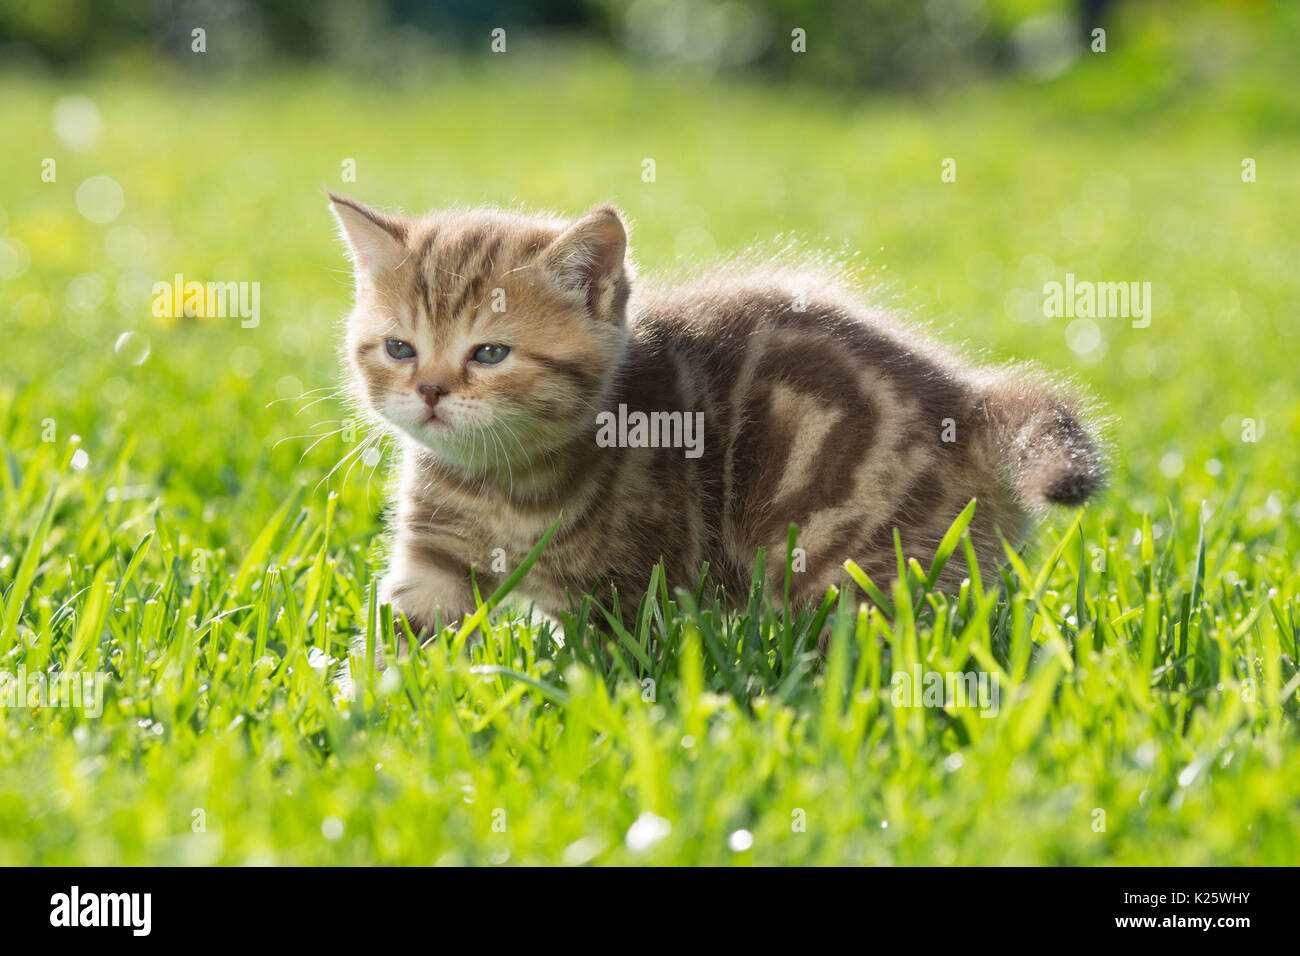 Young baby cat in green grass Stock Photo